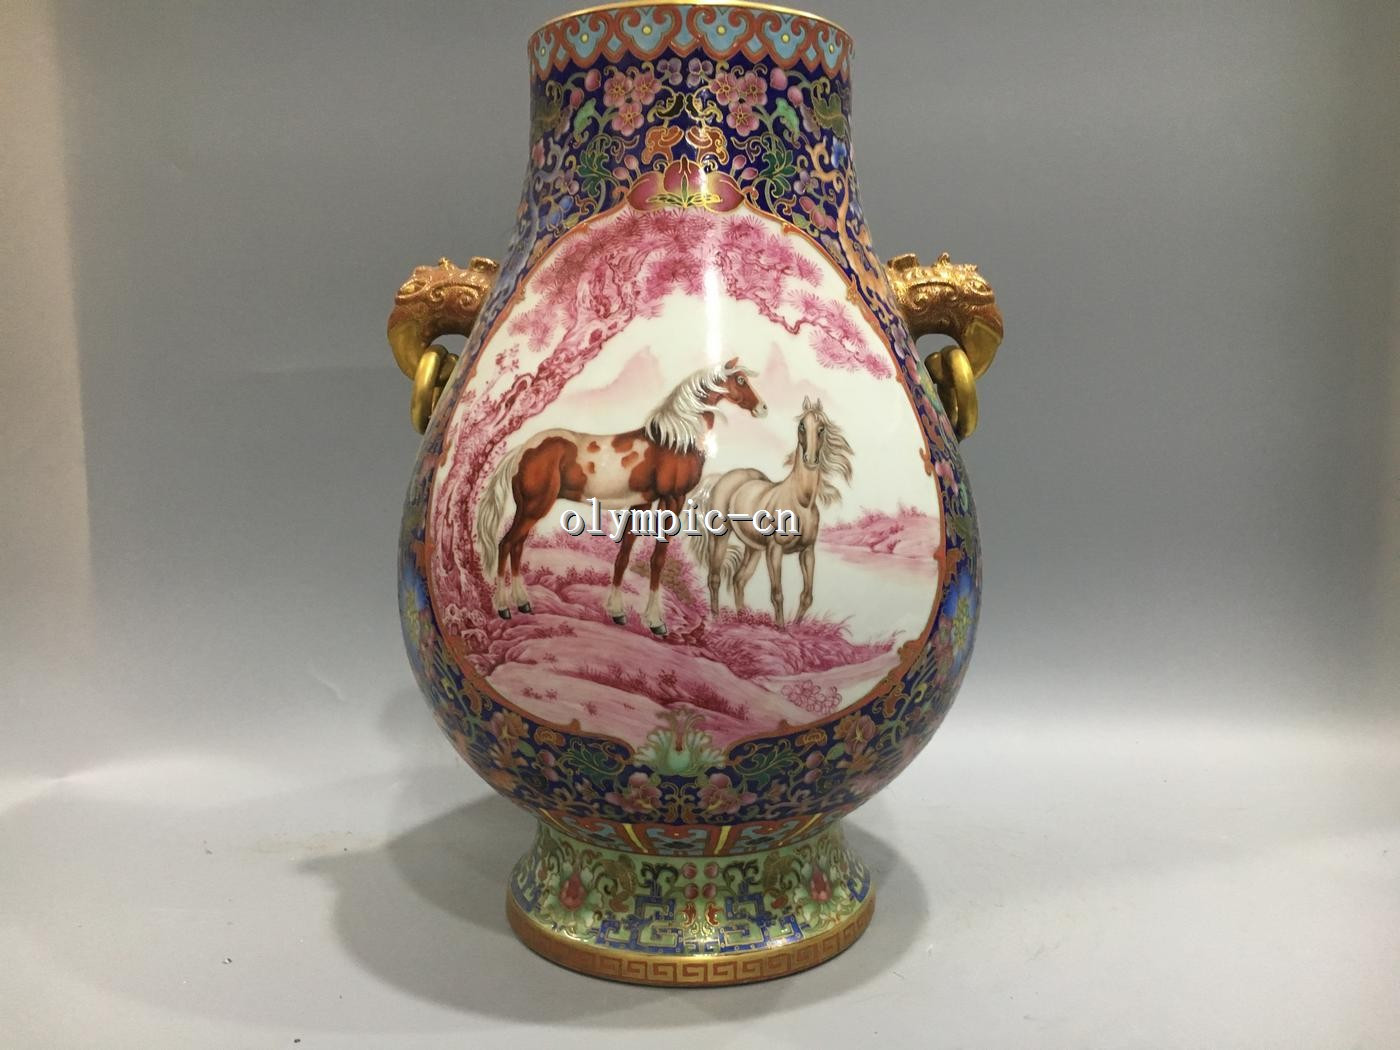 20 Fabulous Chinese Porcelain Vases for Sale 2022 free download chinese porcelain vases for sale of 16 chinese fencai glaze porcelain landscape flower bird deer with i come from china and i am an article collector i am very interested in our chinas 5000 